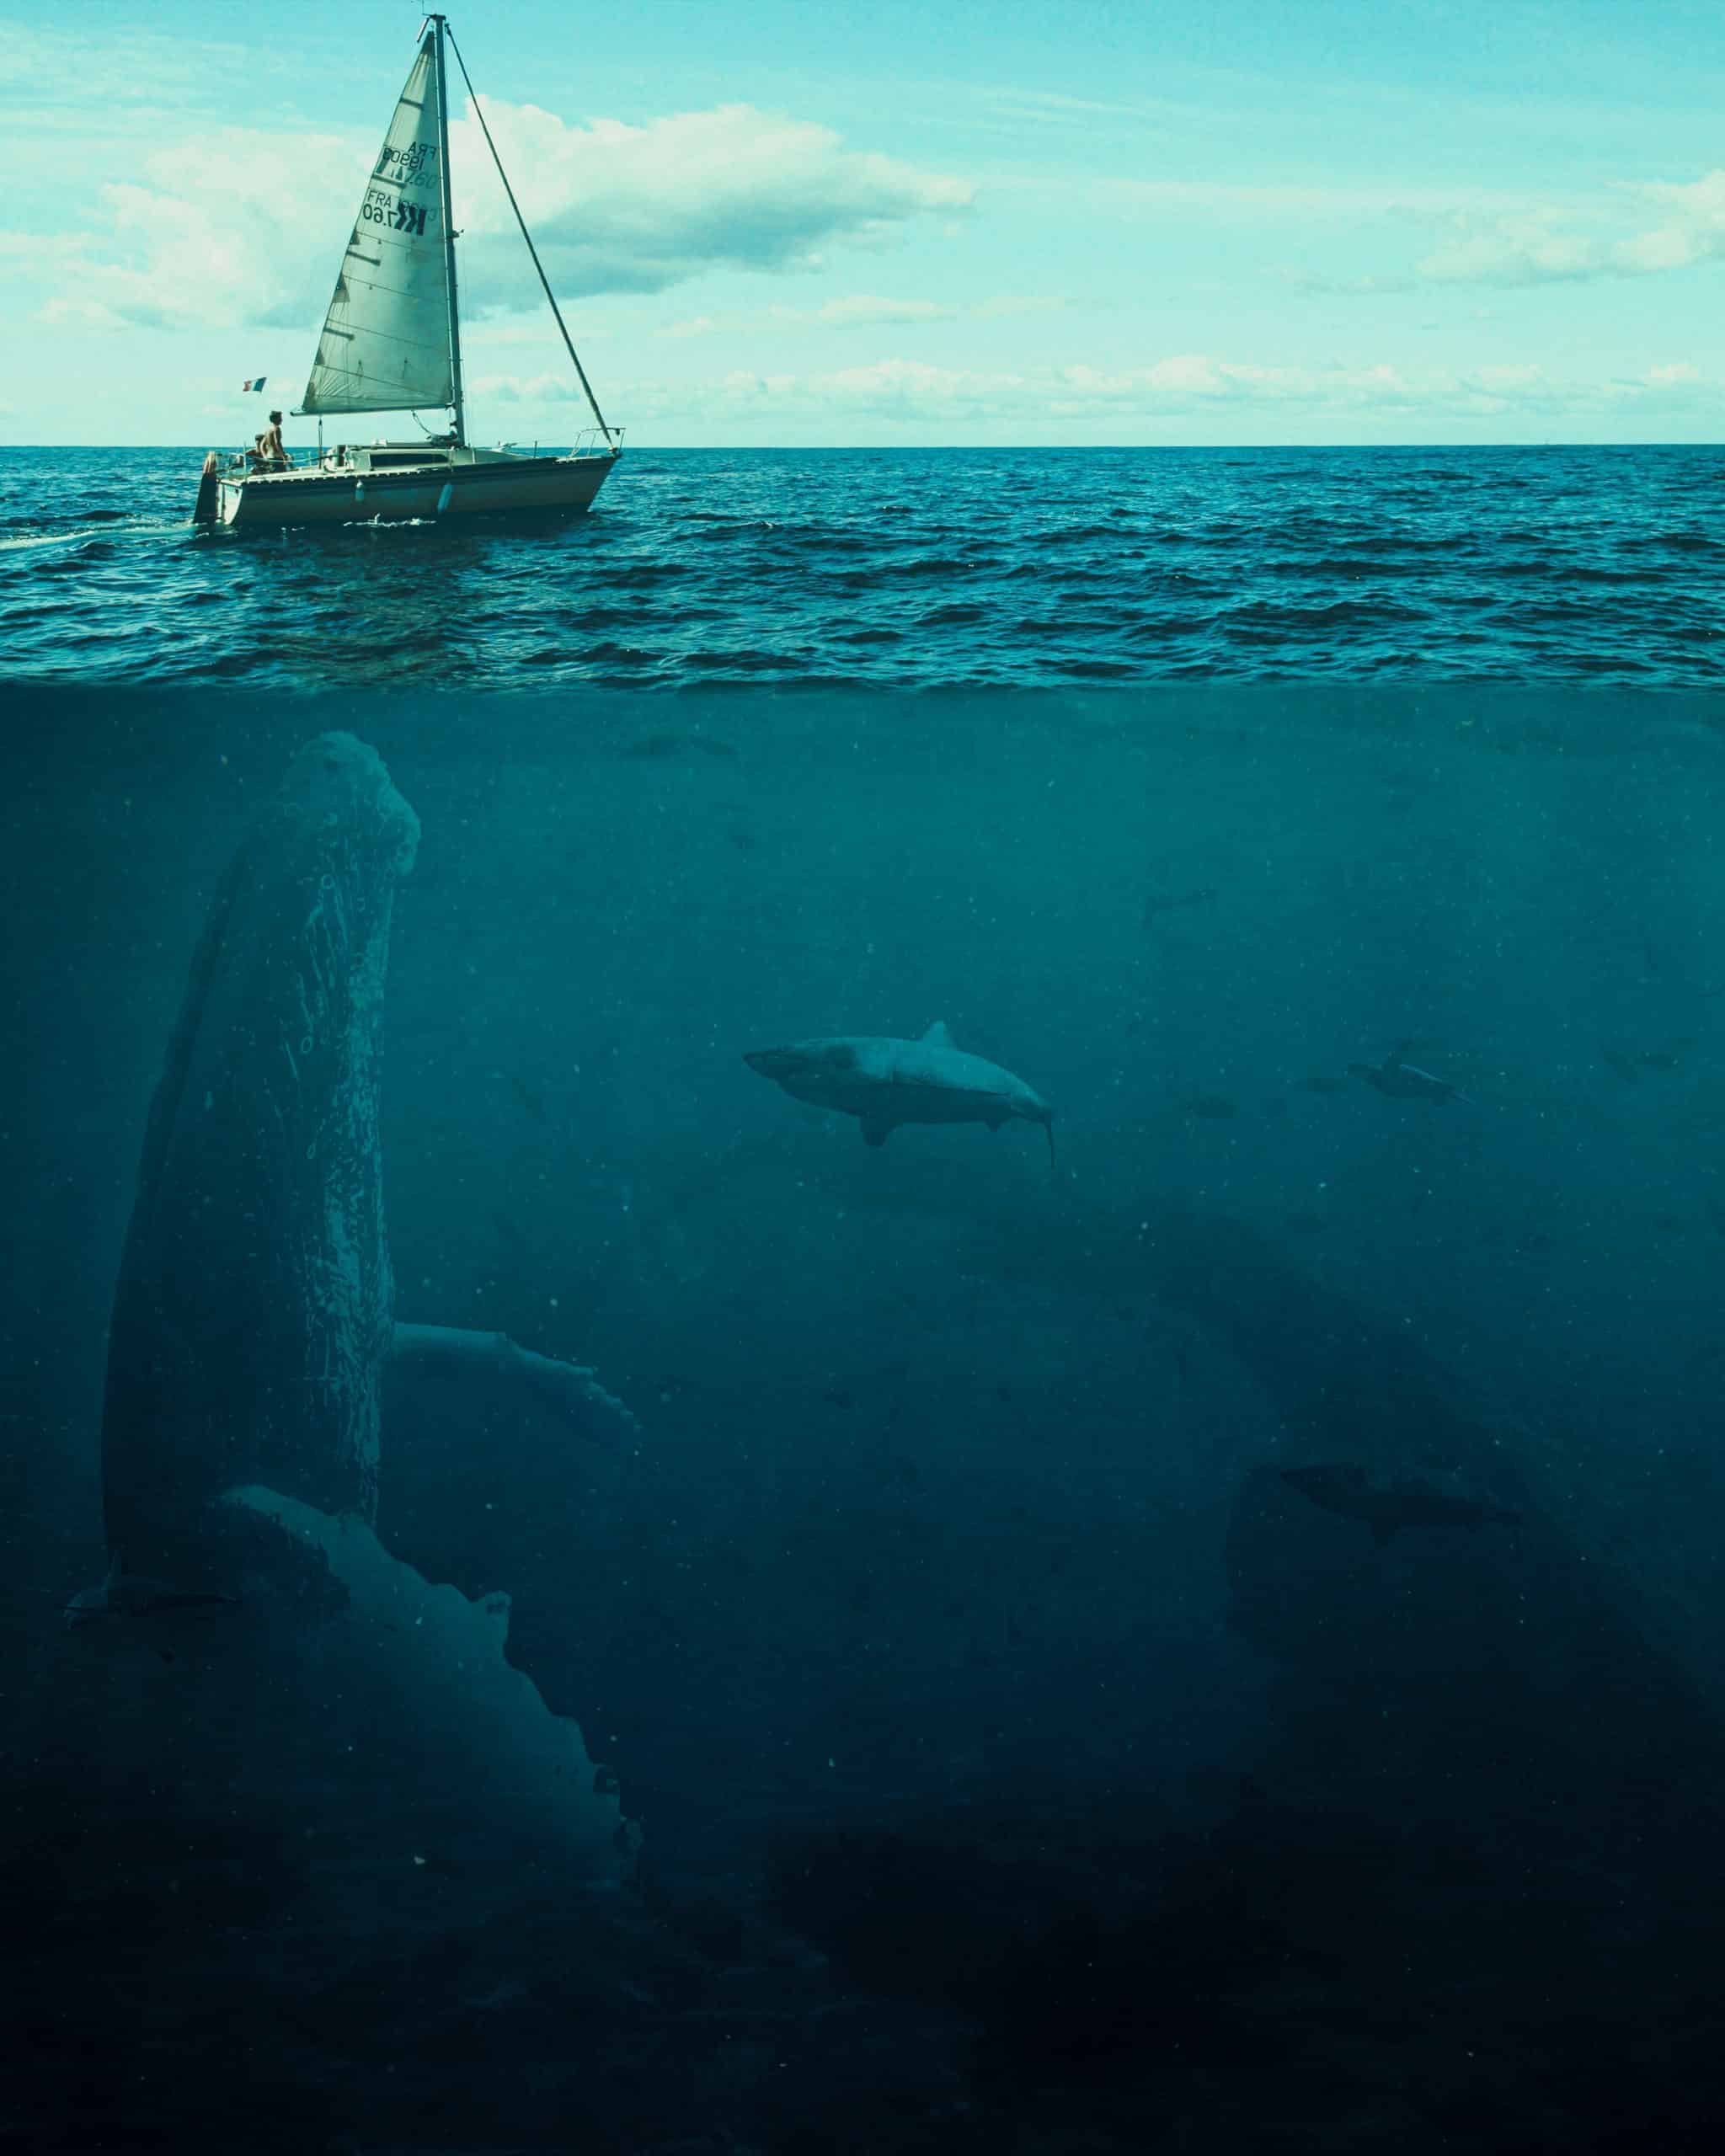 The Big Whale Photoshop Tutorial